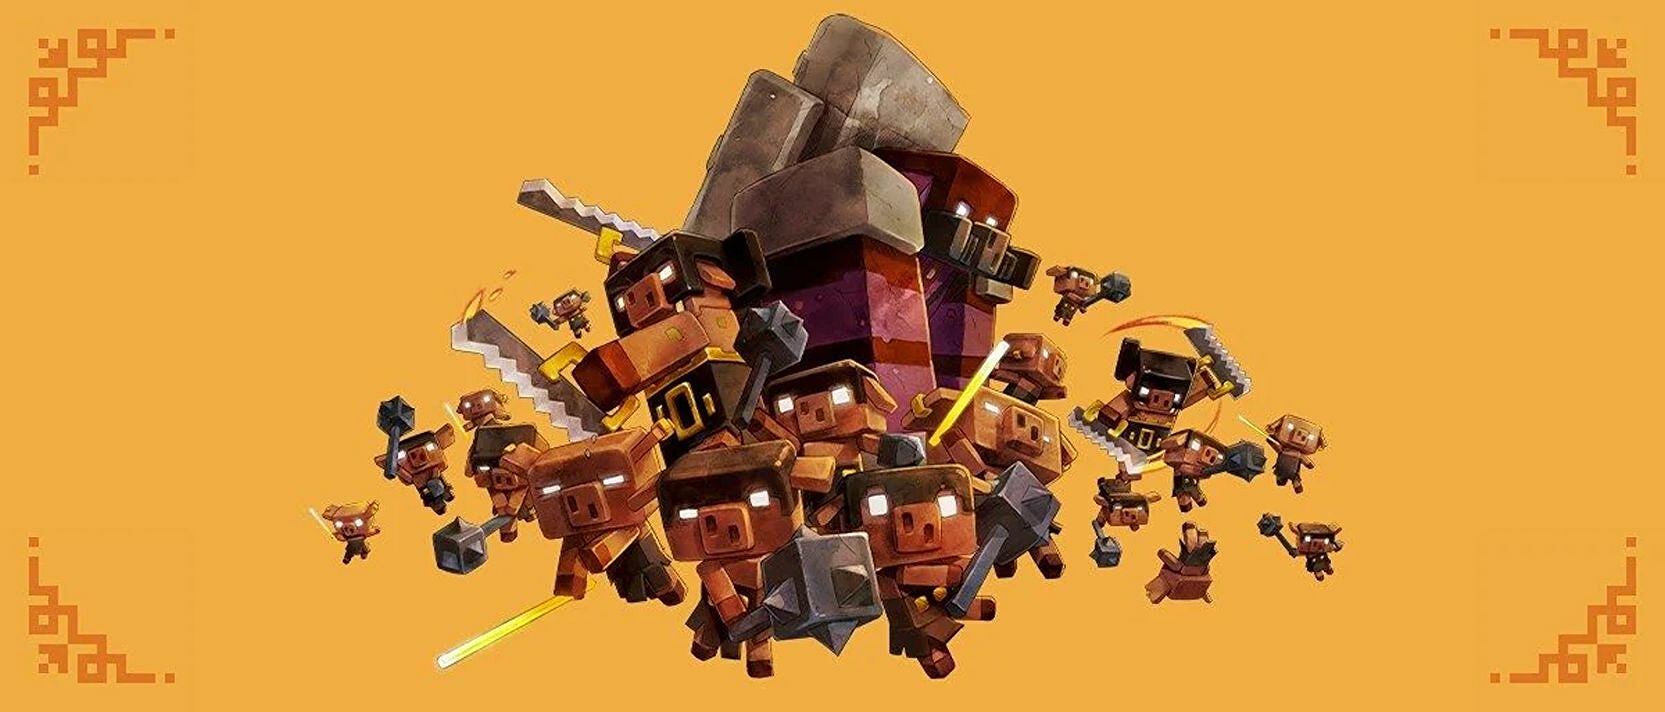 Minecraft Legends will be released on PC and consoles in spring 2023